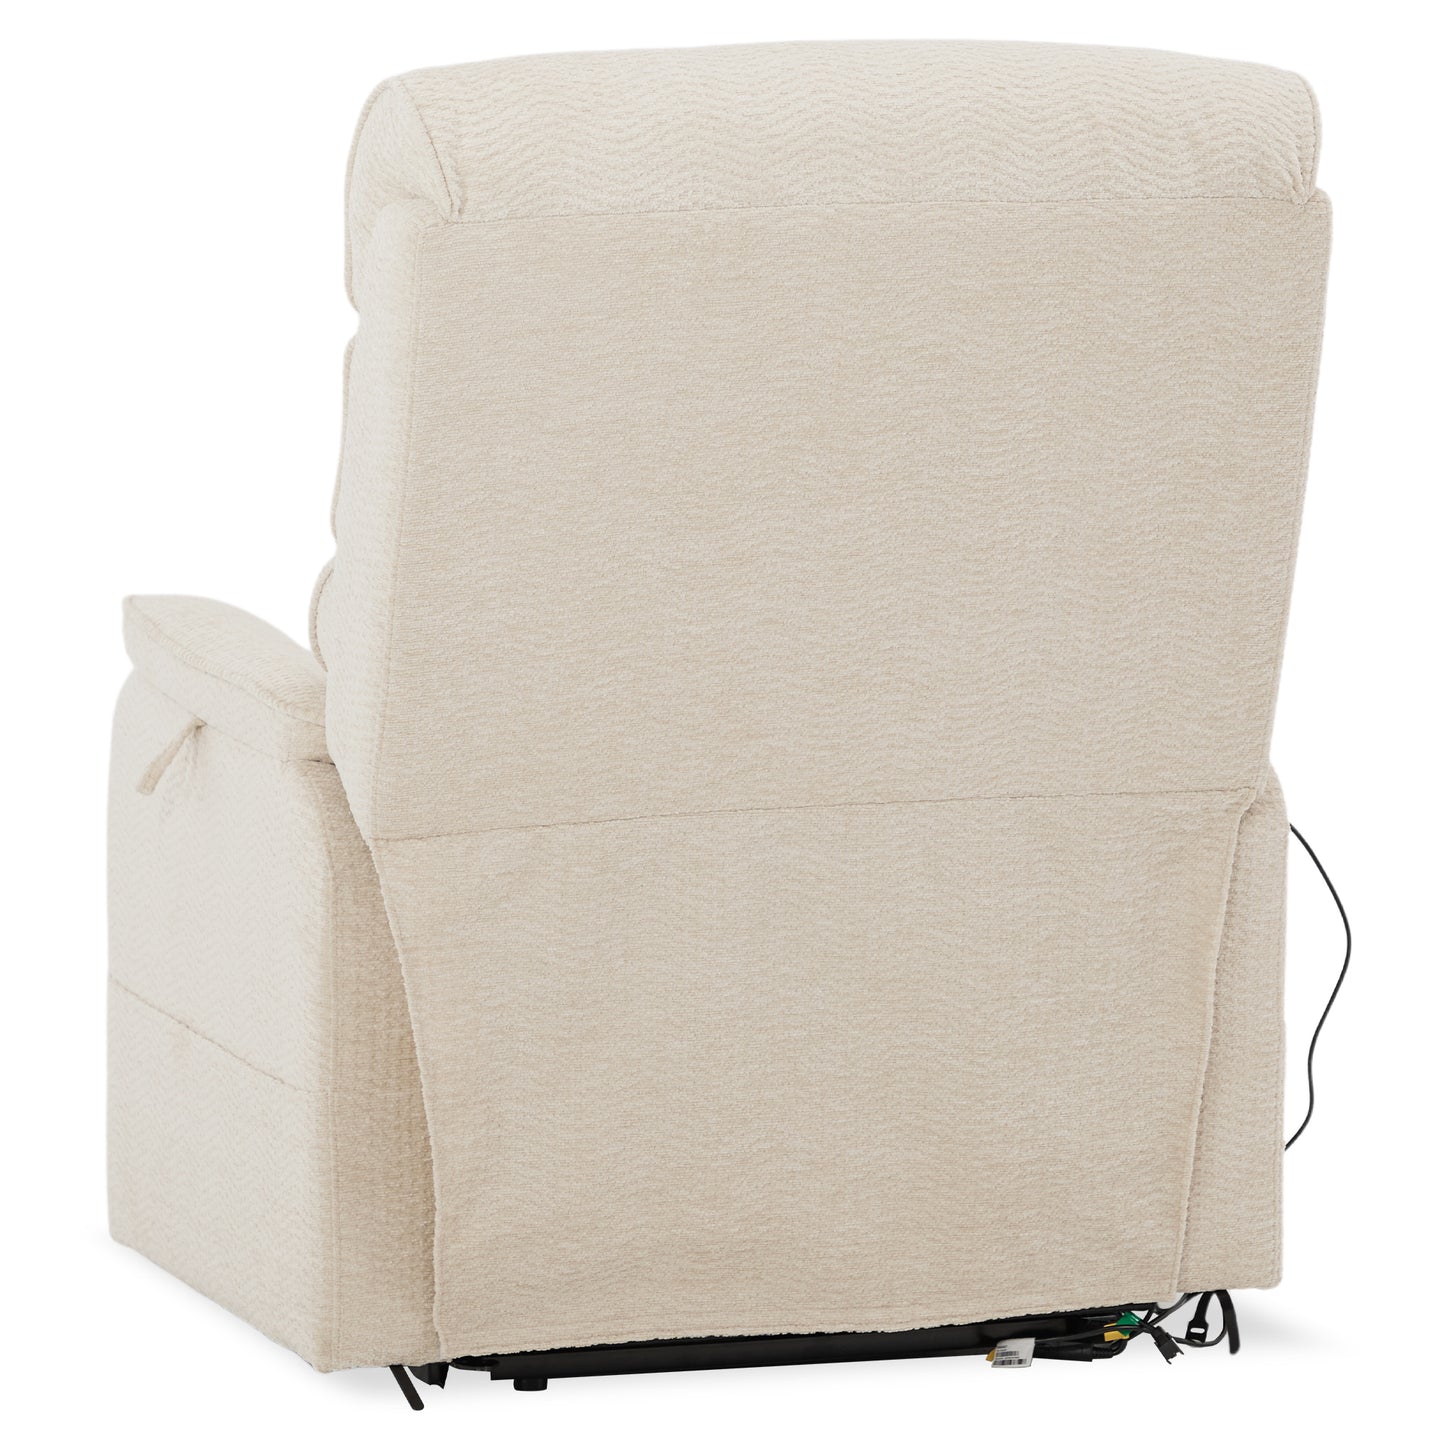 Best Recliners For Big And Tall With Heat Massage And Lay Flat